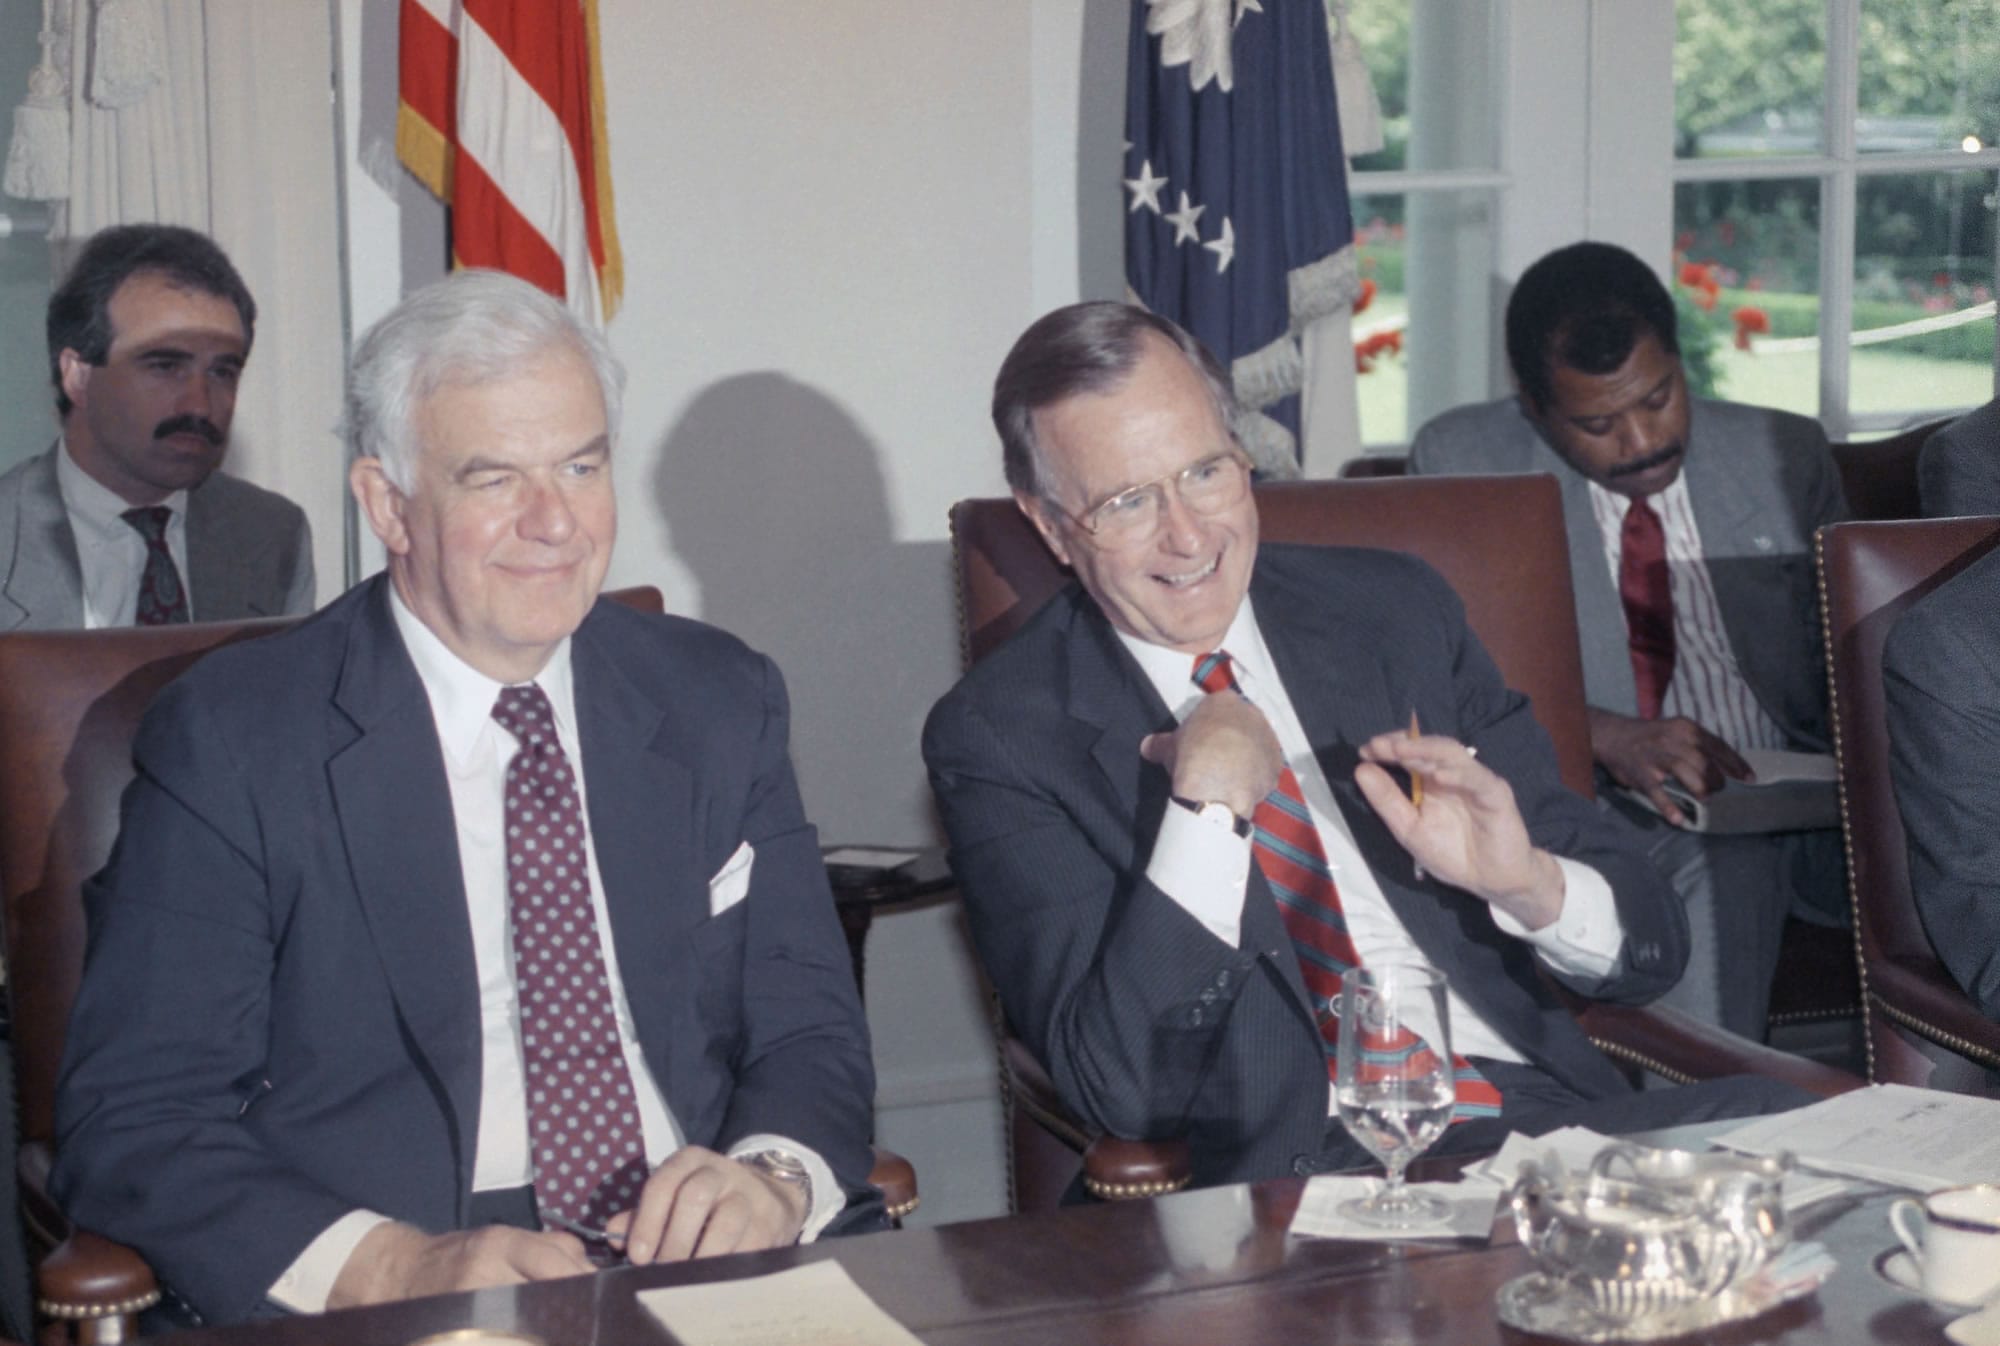 In this June 6, 1989 file photo, House Speaker Tom Foley of Washington sits next to U.S. President George H. Bush during a meeting with the congressional leadership at the White House in Washington.